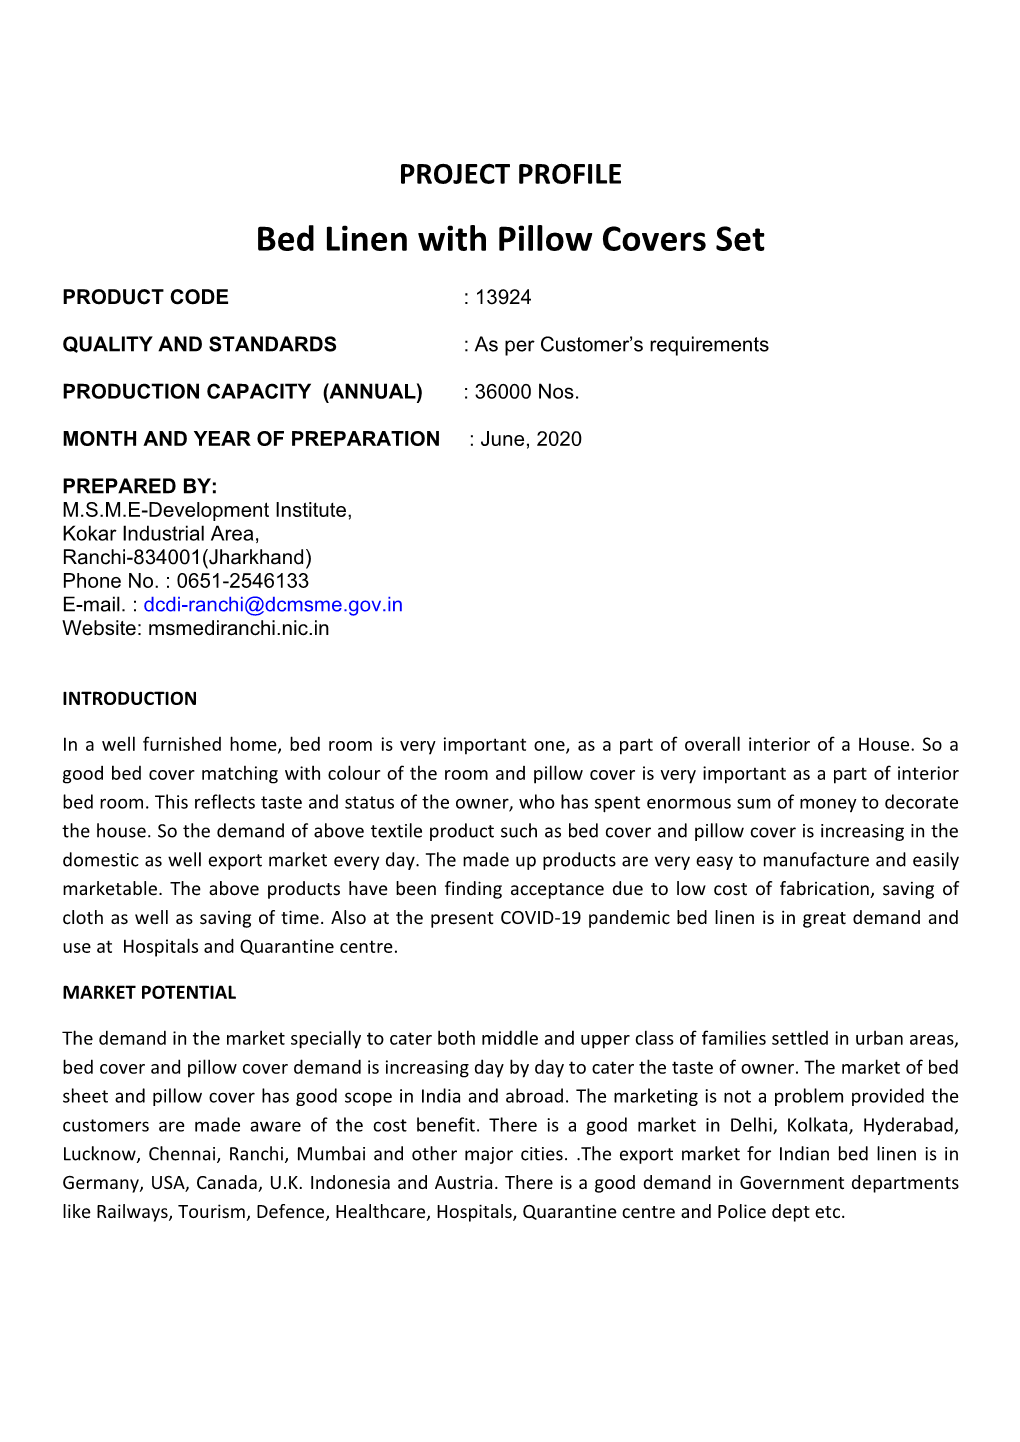 Bed Linen with Pillow Covers Set